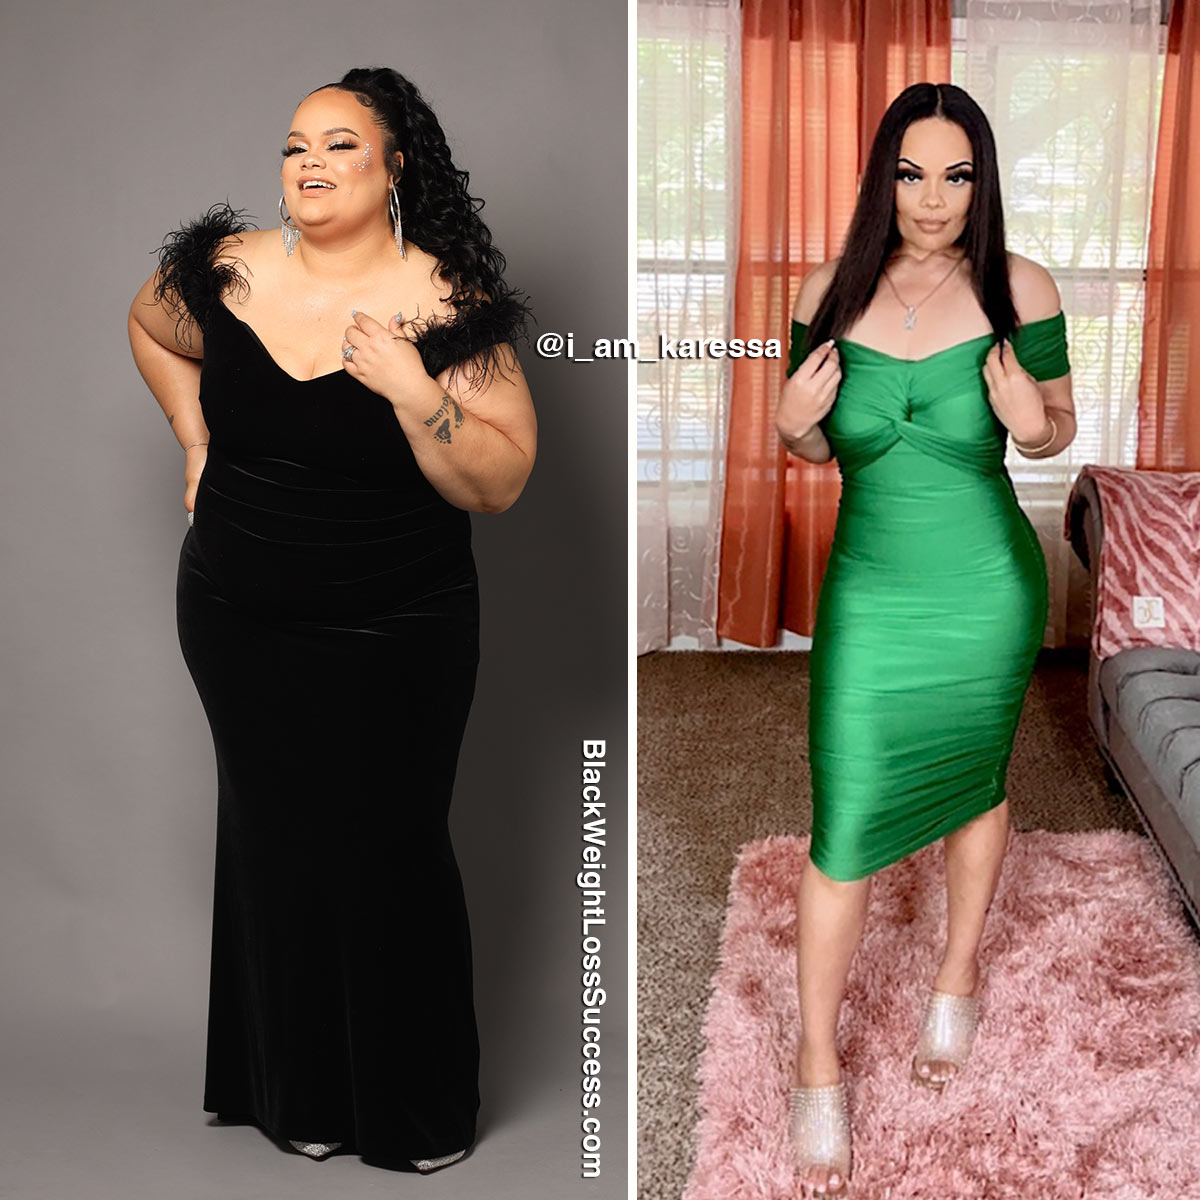 Karessa before and after weight loss